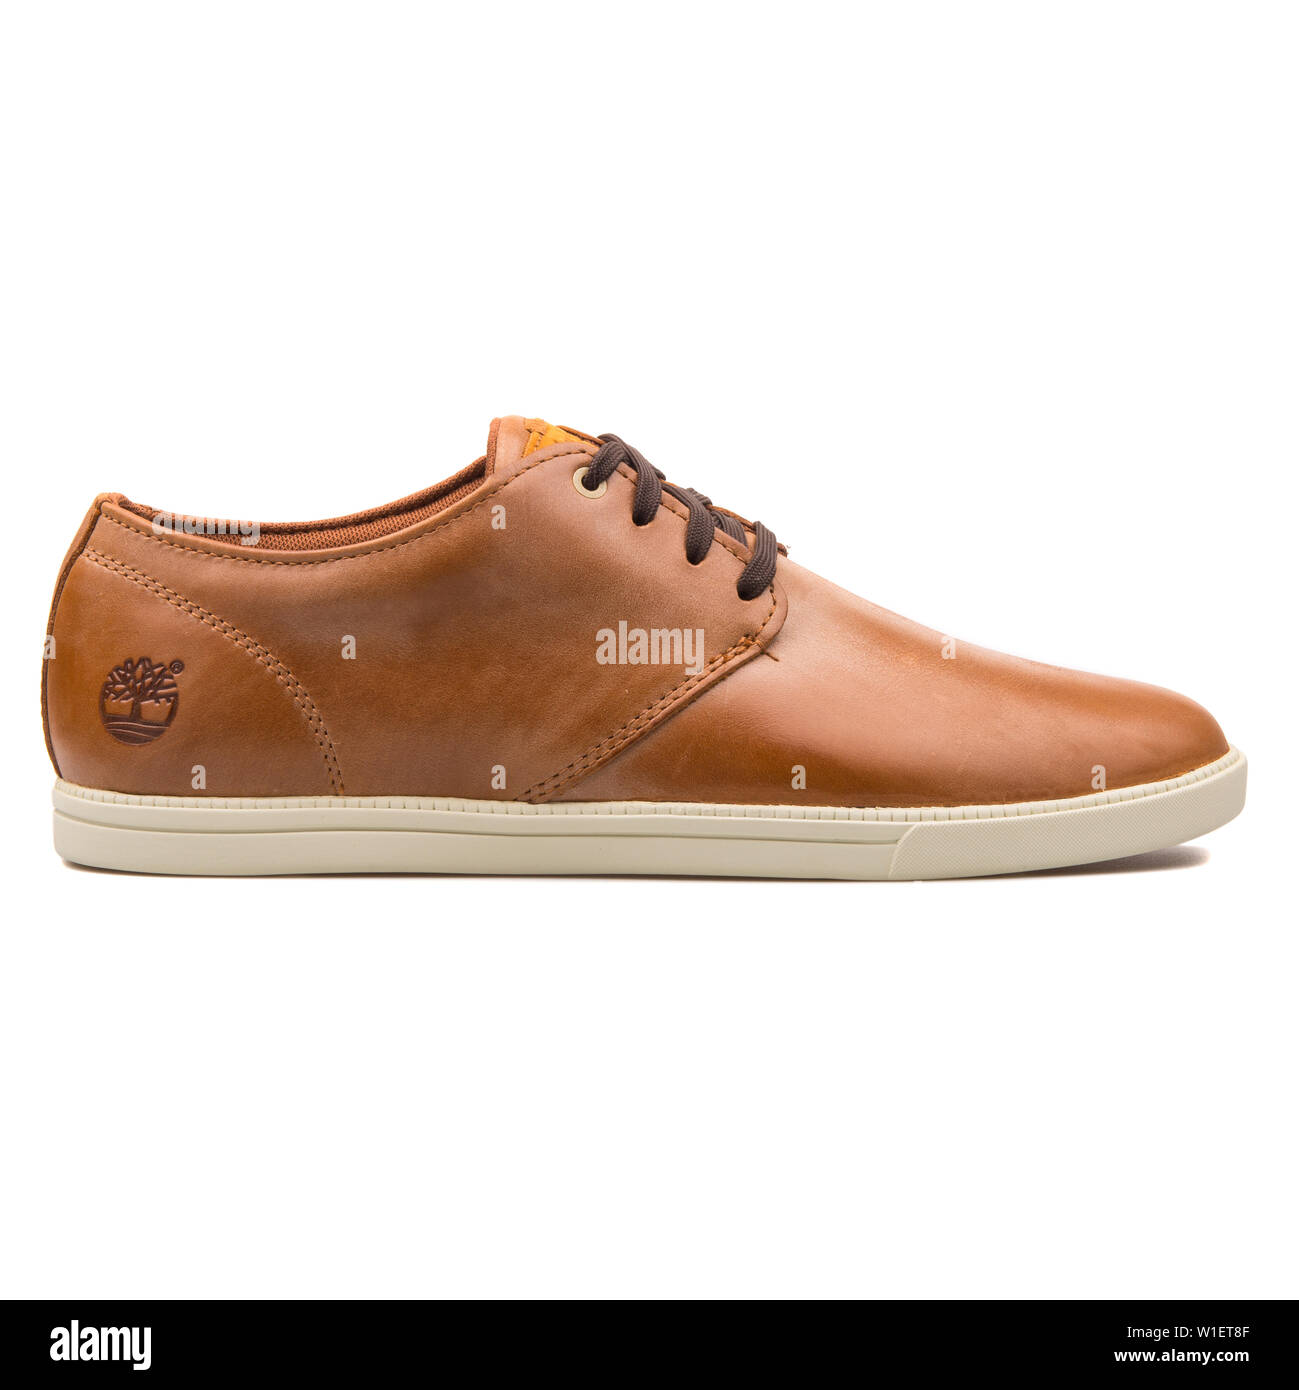 VIENNA, AUSTRIA - AUGUST 10, 2017: Timberland Fulk LP Low Copper Kettl  brown sneaker on white background Stock Photo - Alamy